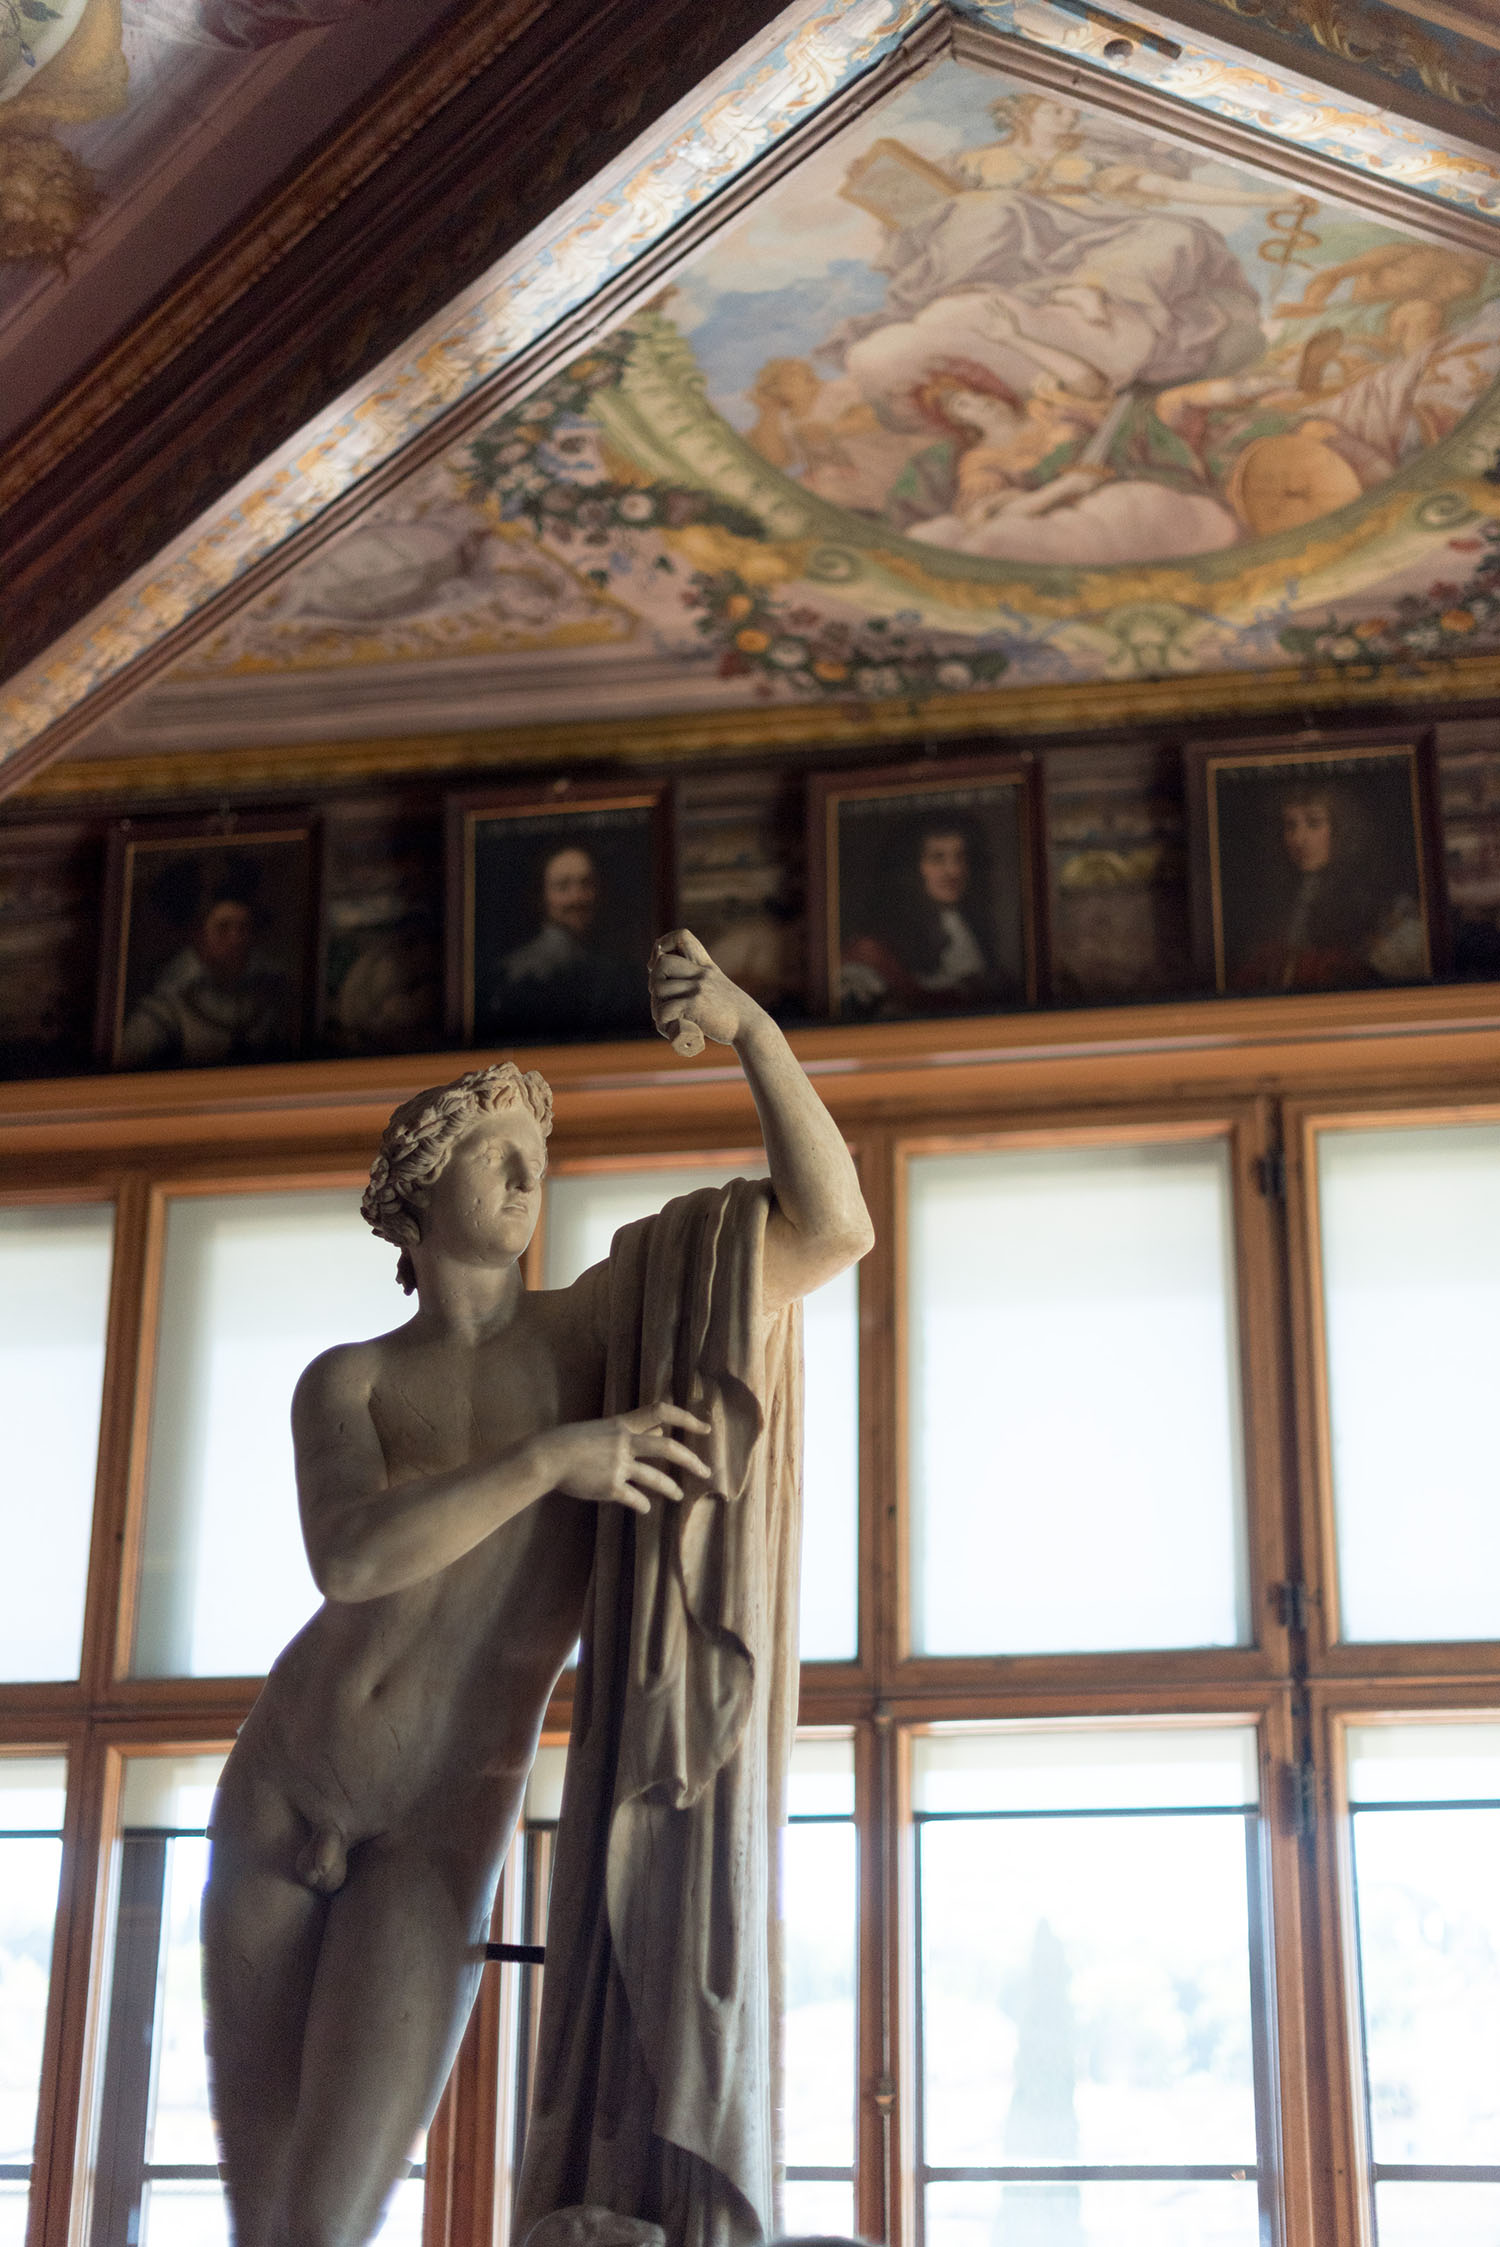 A statue at the Uffizi Gallery in Florence, Italy, as captured by top Winnipeg travel blogger Cee Fardoe of Coco & Vera